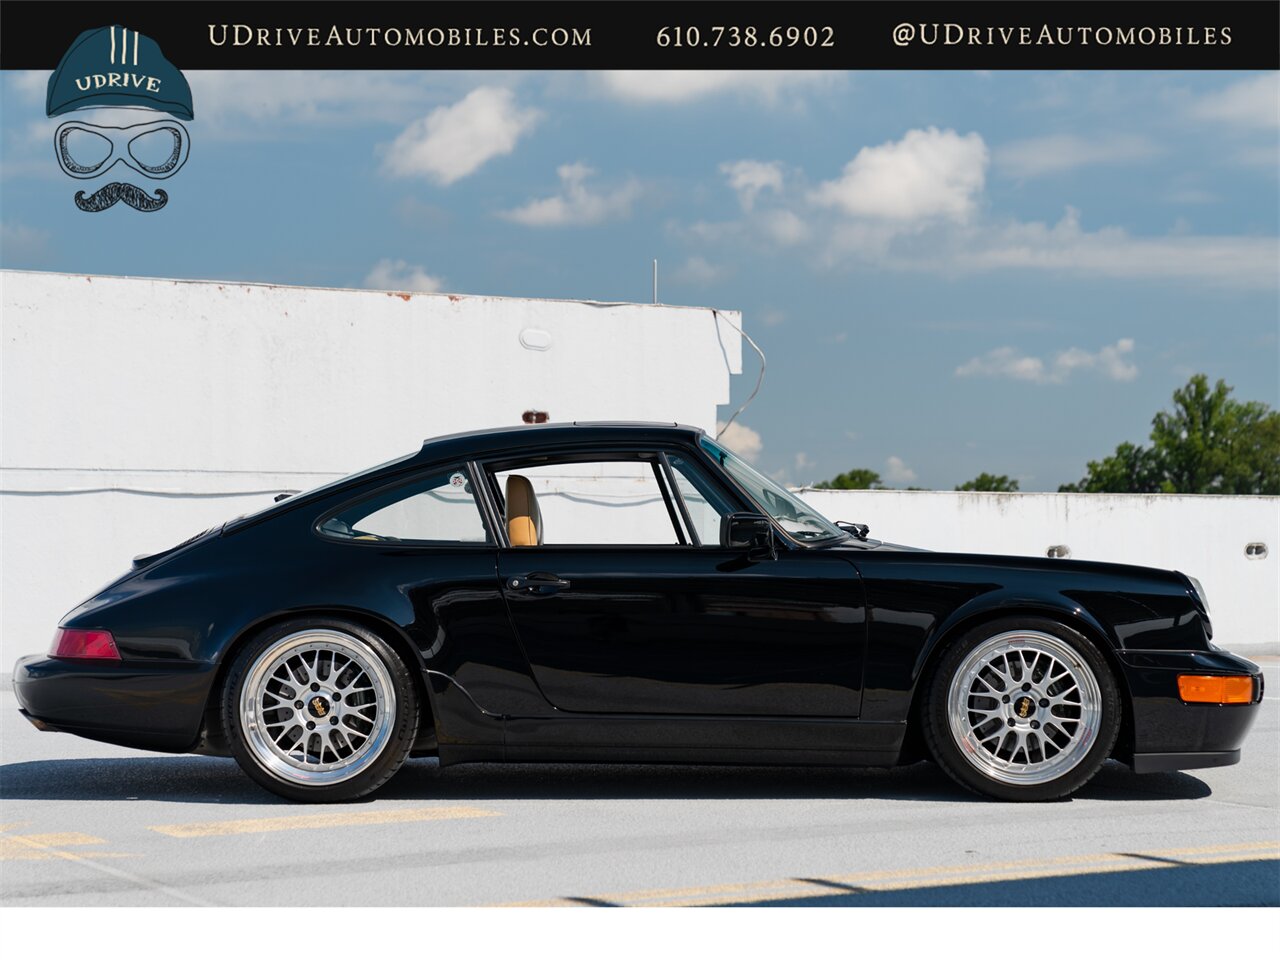 1989 Porsche 911 Carrera 4  964 C4 5 Speed Manual $63k Recent Service and Upgrades - Photo 19 - West Chester, PA 19382